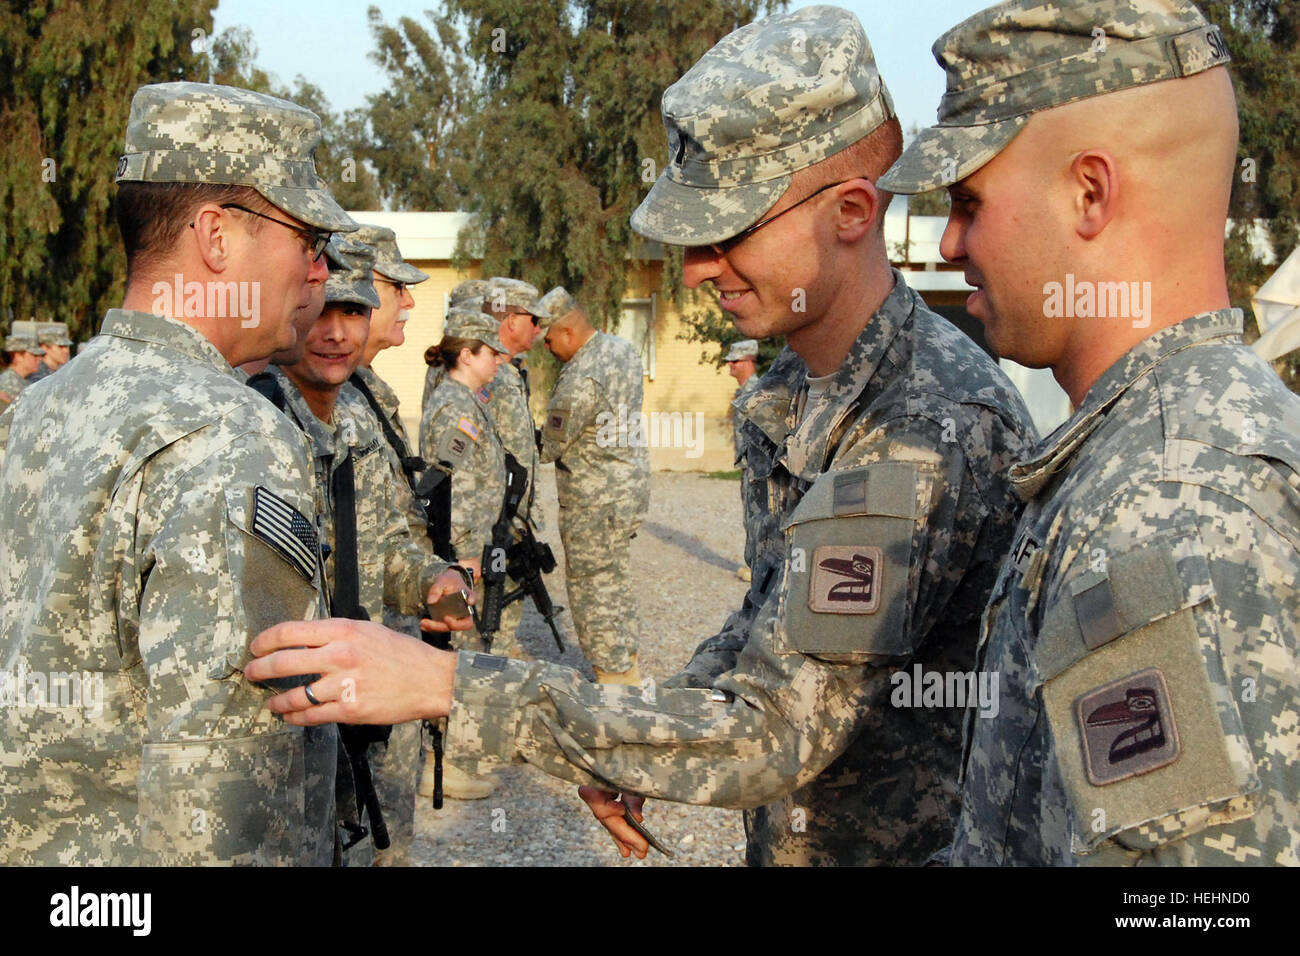 First Lt. Sean Taborne from Port Orchard, Wash., the Personal Security Detail platoon commander with Alpha Company, 181st Brigade Support battalion, 81st Brigade Combat Team, Washington Army National Guard, awards combat patches to his platoon Dec. 30, 2008 at Joint Base Balad, Iraq. In a tradition dating back to WWII, combat patches depicting the unit they serve with during wartime are placed on each Soldier's right sleeve. The 106 members of A Co.,181st BSB provide security for Iraqi businesses on base and the hospital, escort local nationals working on base and provide Personal Security Det Stock Photo